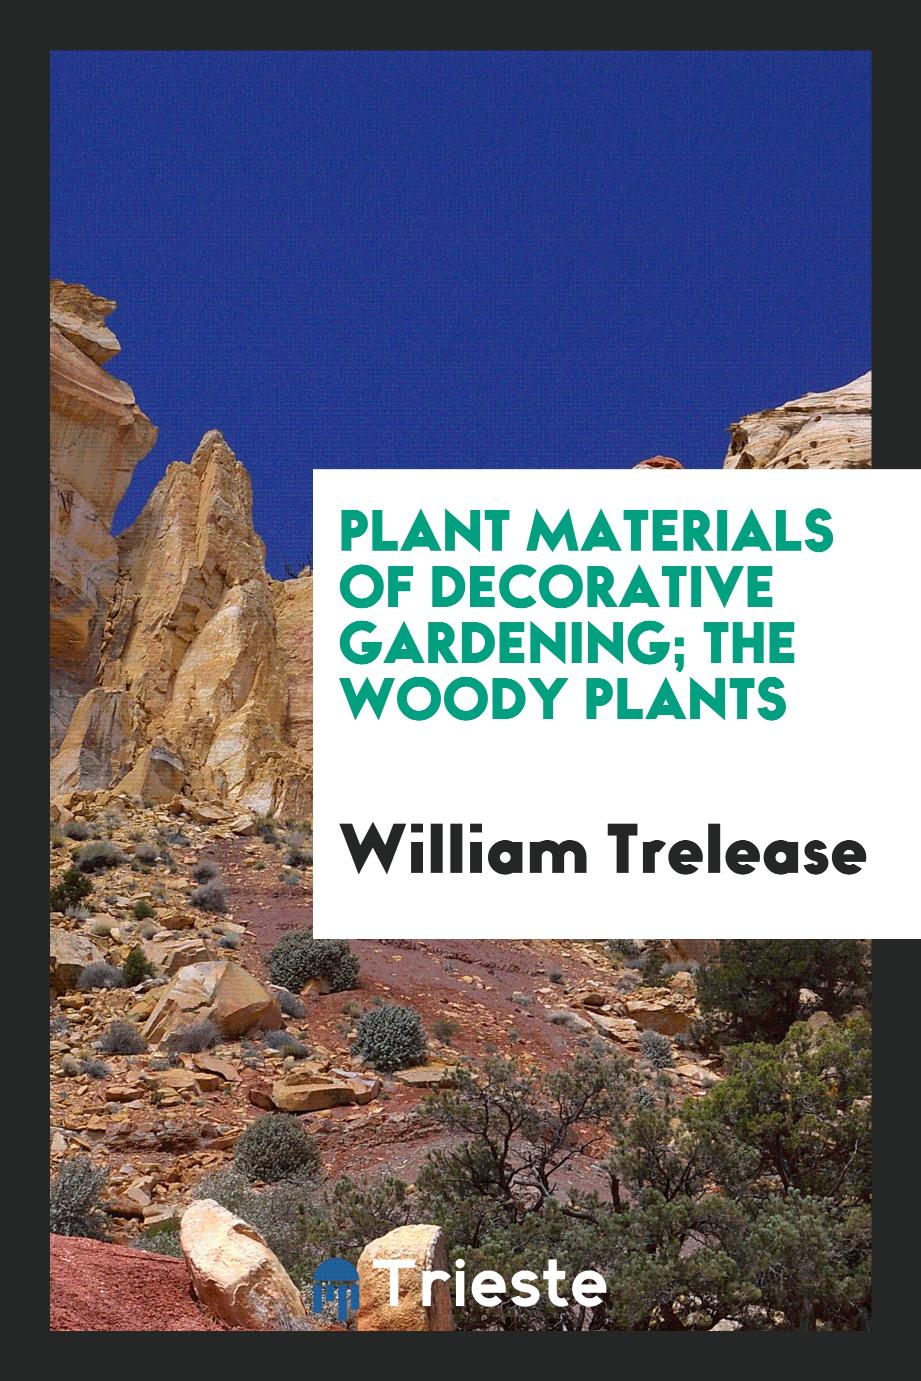 Plant materials of decorative gardening; the woody plants